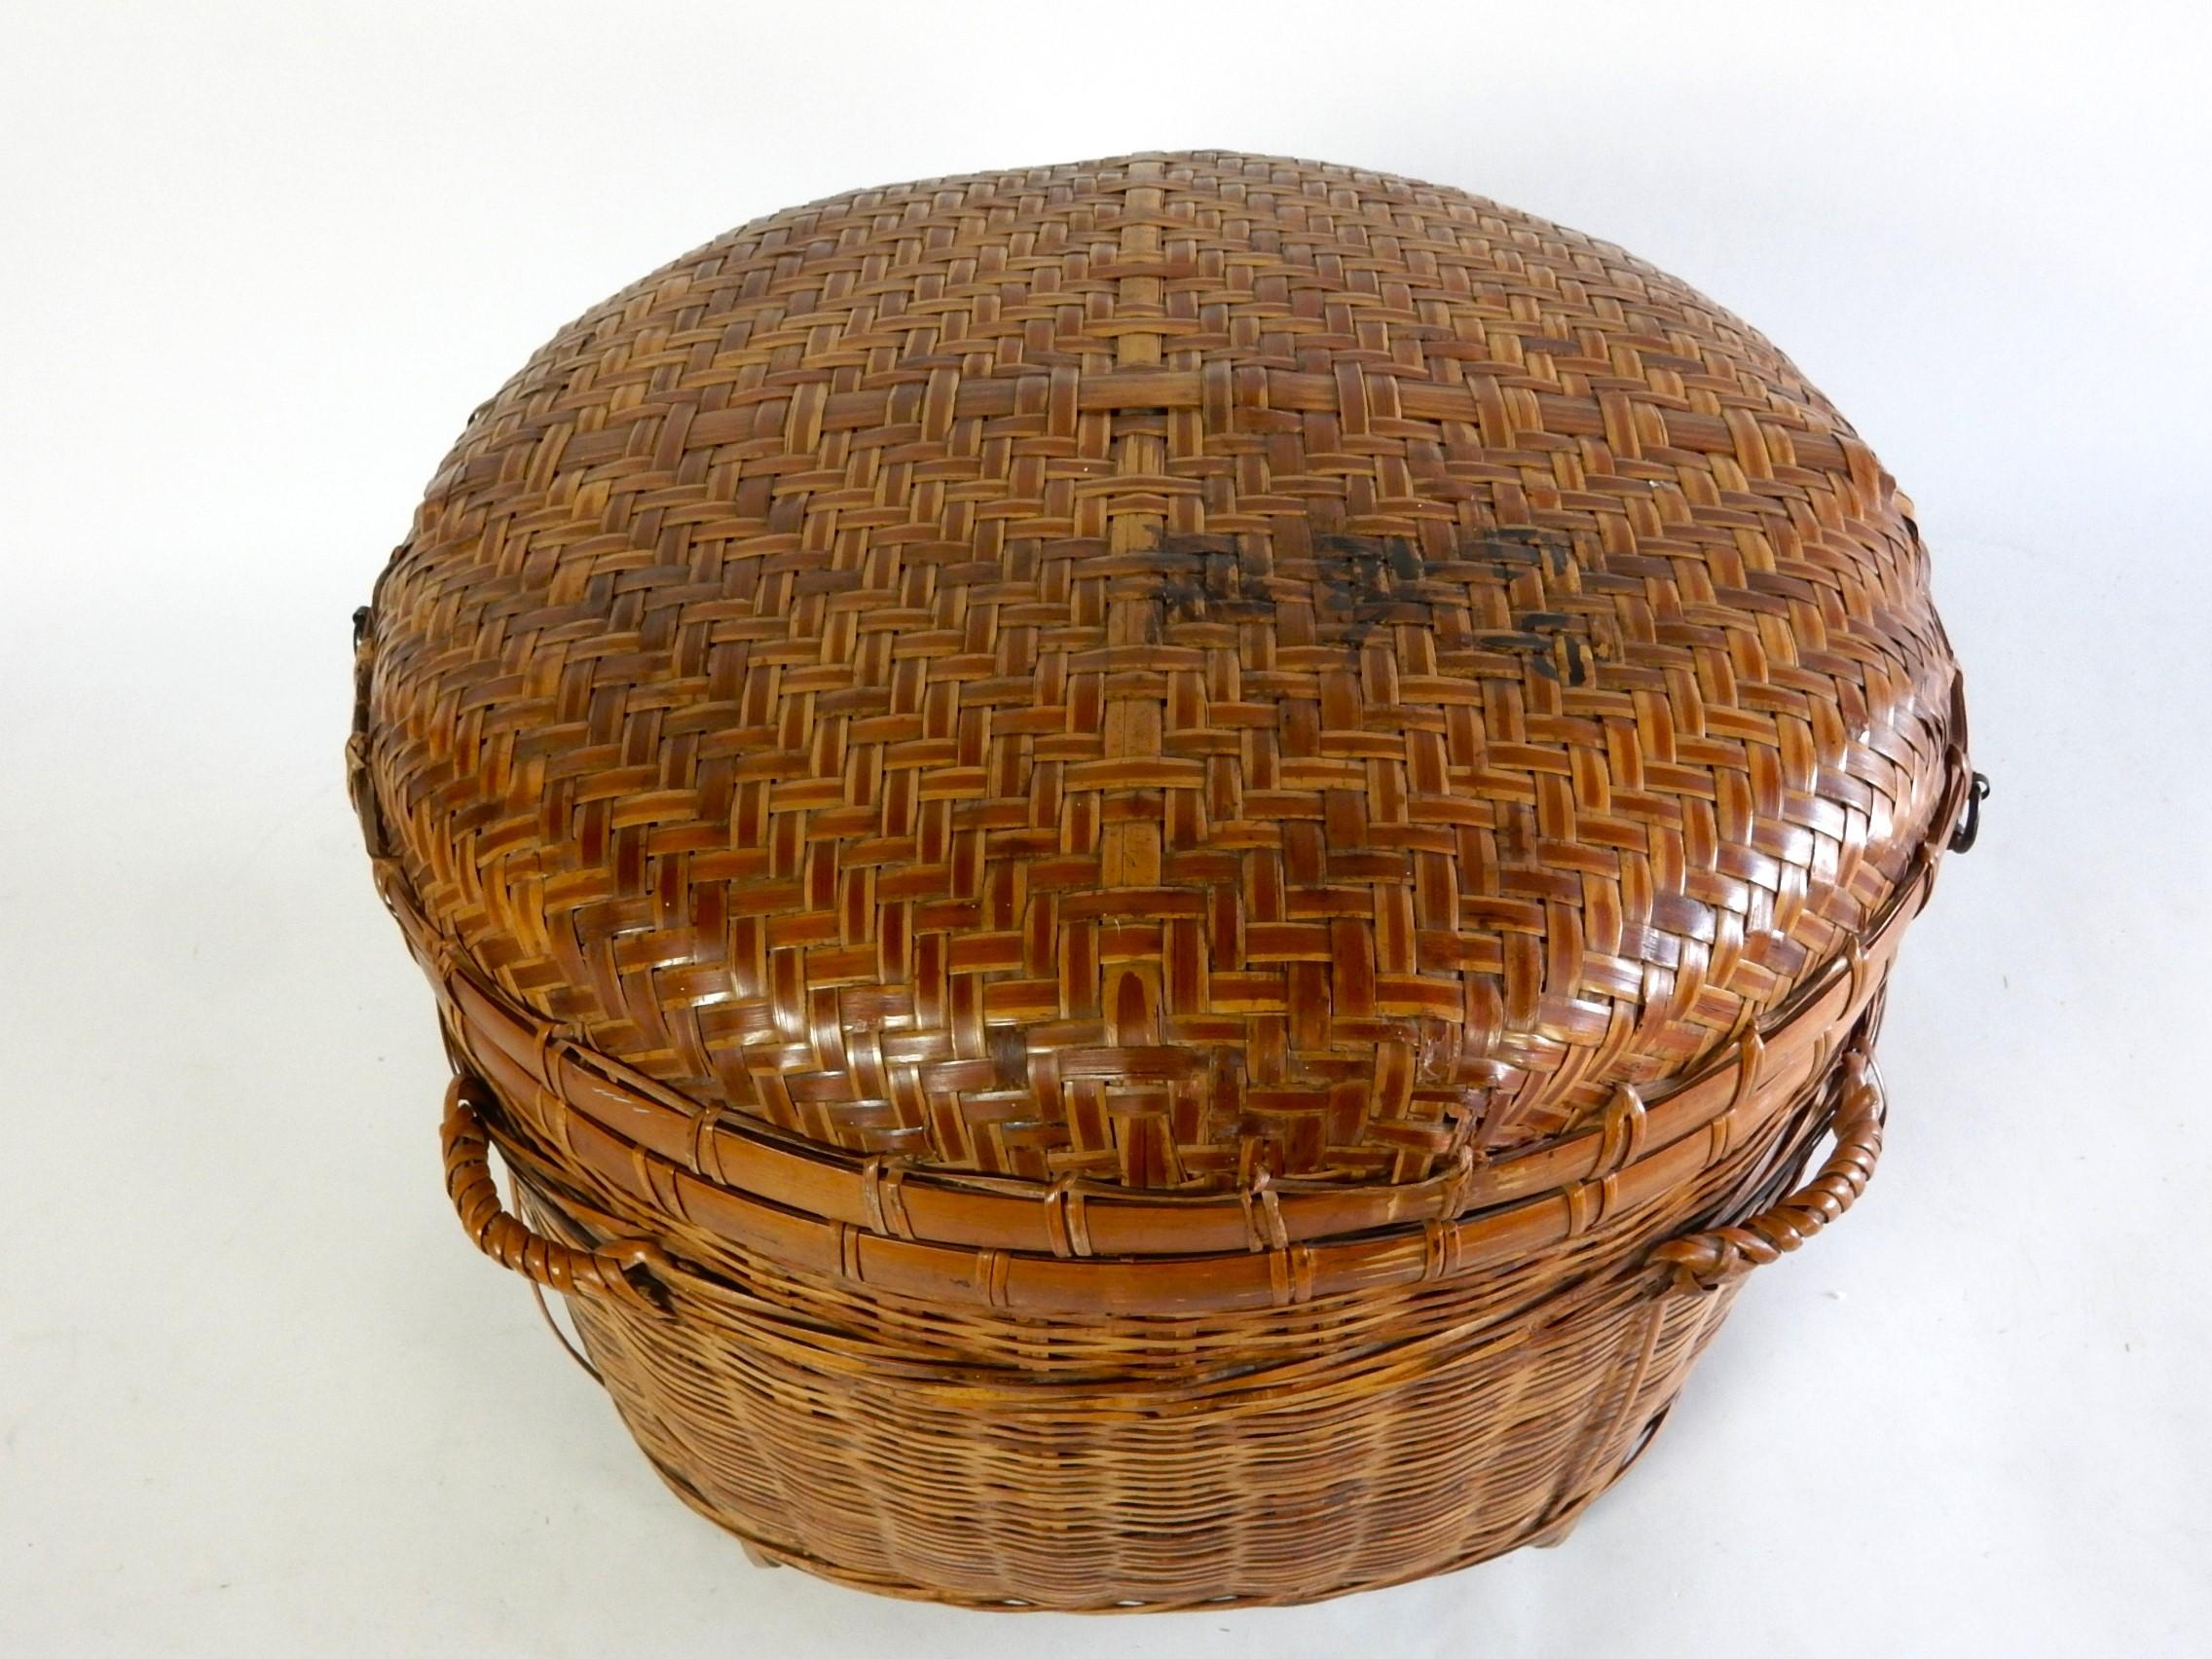 19th century Qing period Chinese storage basket intricately hand woven with bamboo and cane. Iron hinges and pull.
Measures 20